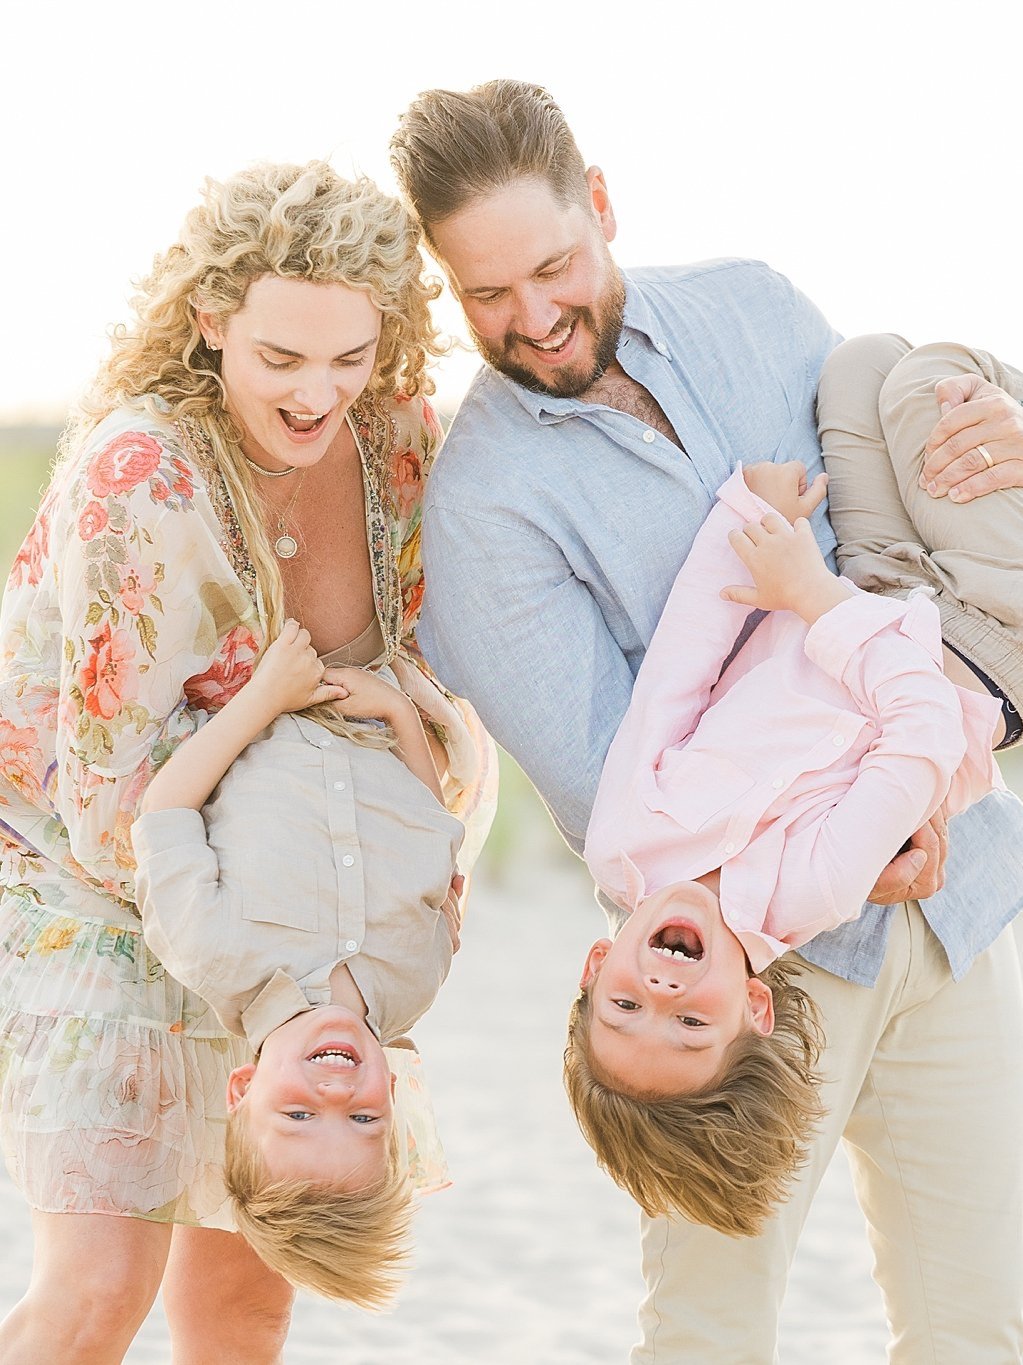 TIPS FOR A GREAT FAMILY SESSION